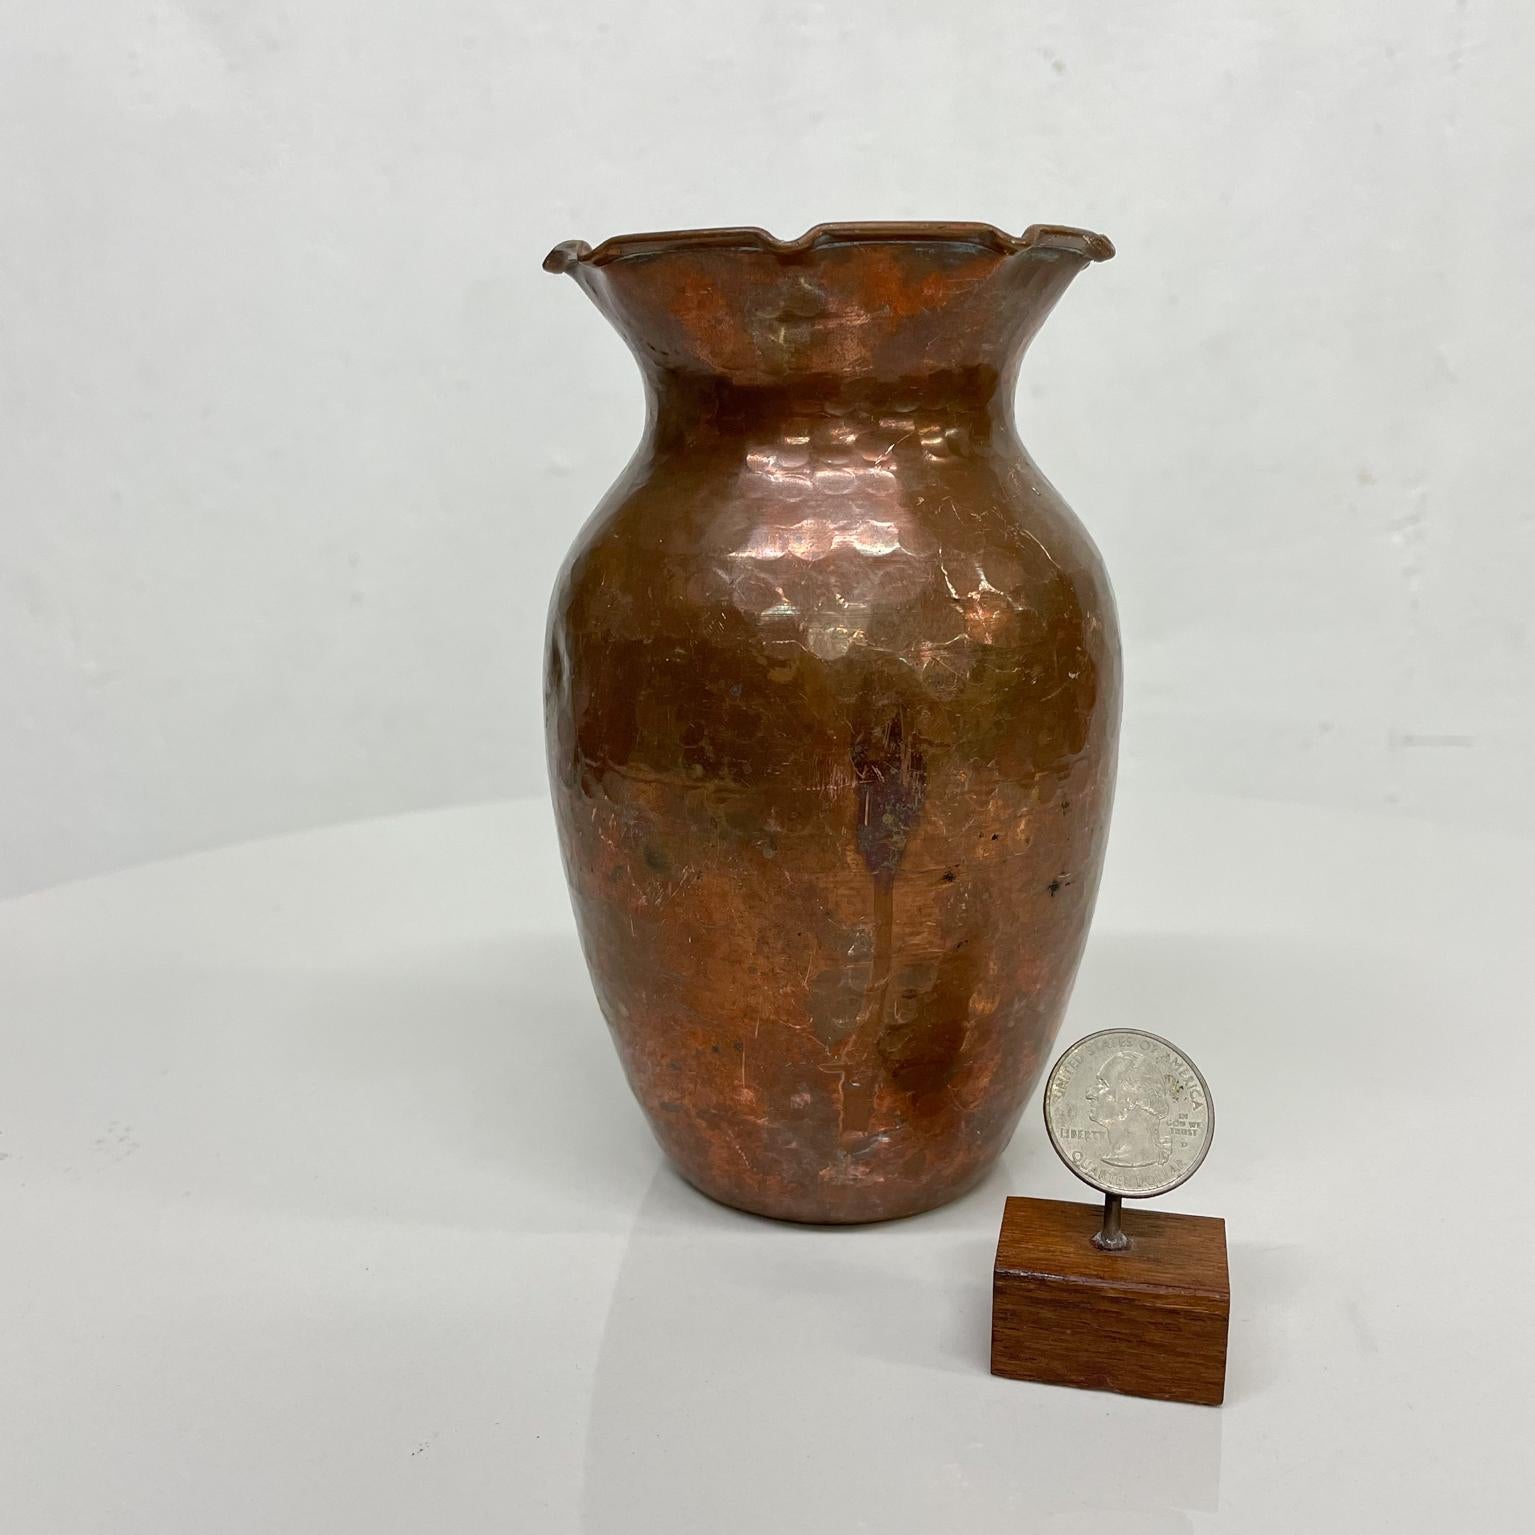 Copper vase
Handcrafted Style of Santa Clara del Cobre Michoacan Mexico Handwrought Hammered Medium Copper Vase 
Unsigned.
With warm patina and minor scuffs on finish. 
Original unrestored vintage condition.
4 diameter x 6.25 height
See images